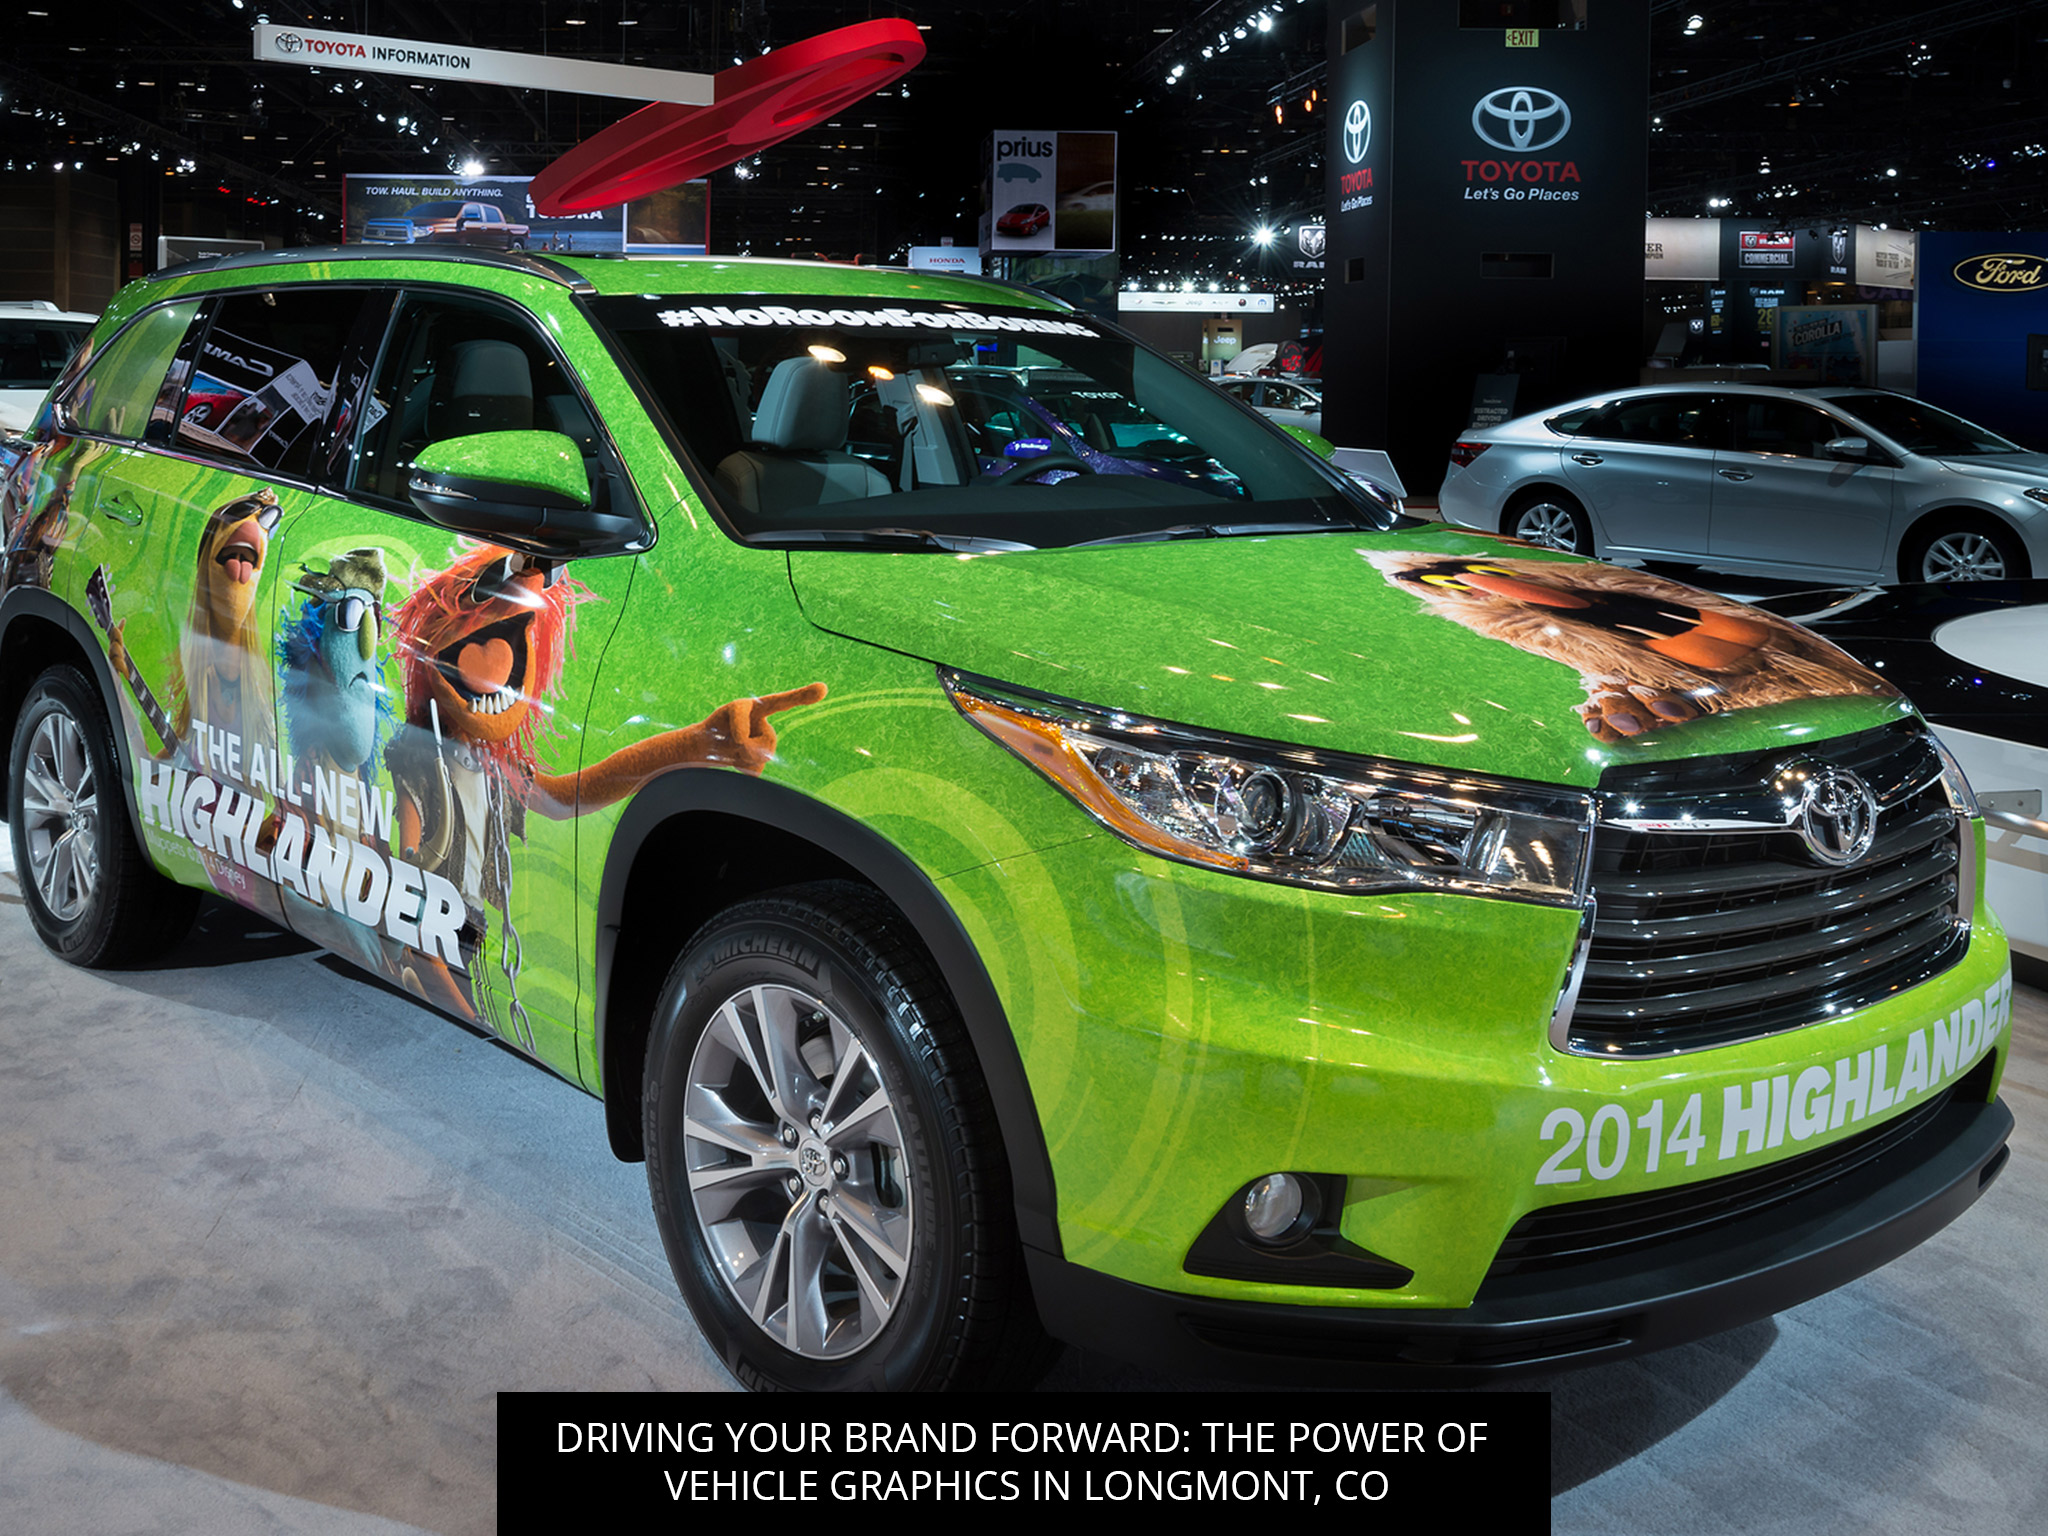 Driving Your Brand Forward: The Power of Vehicle Graphics in Longmont, CO